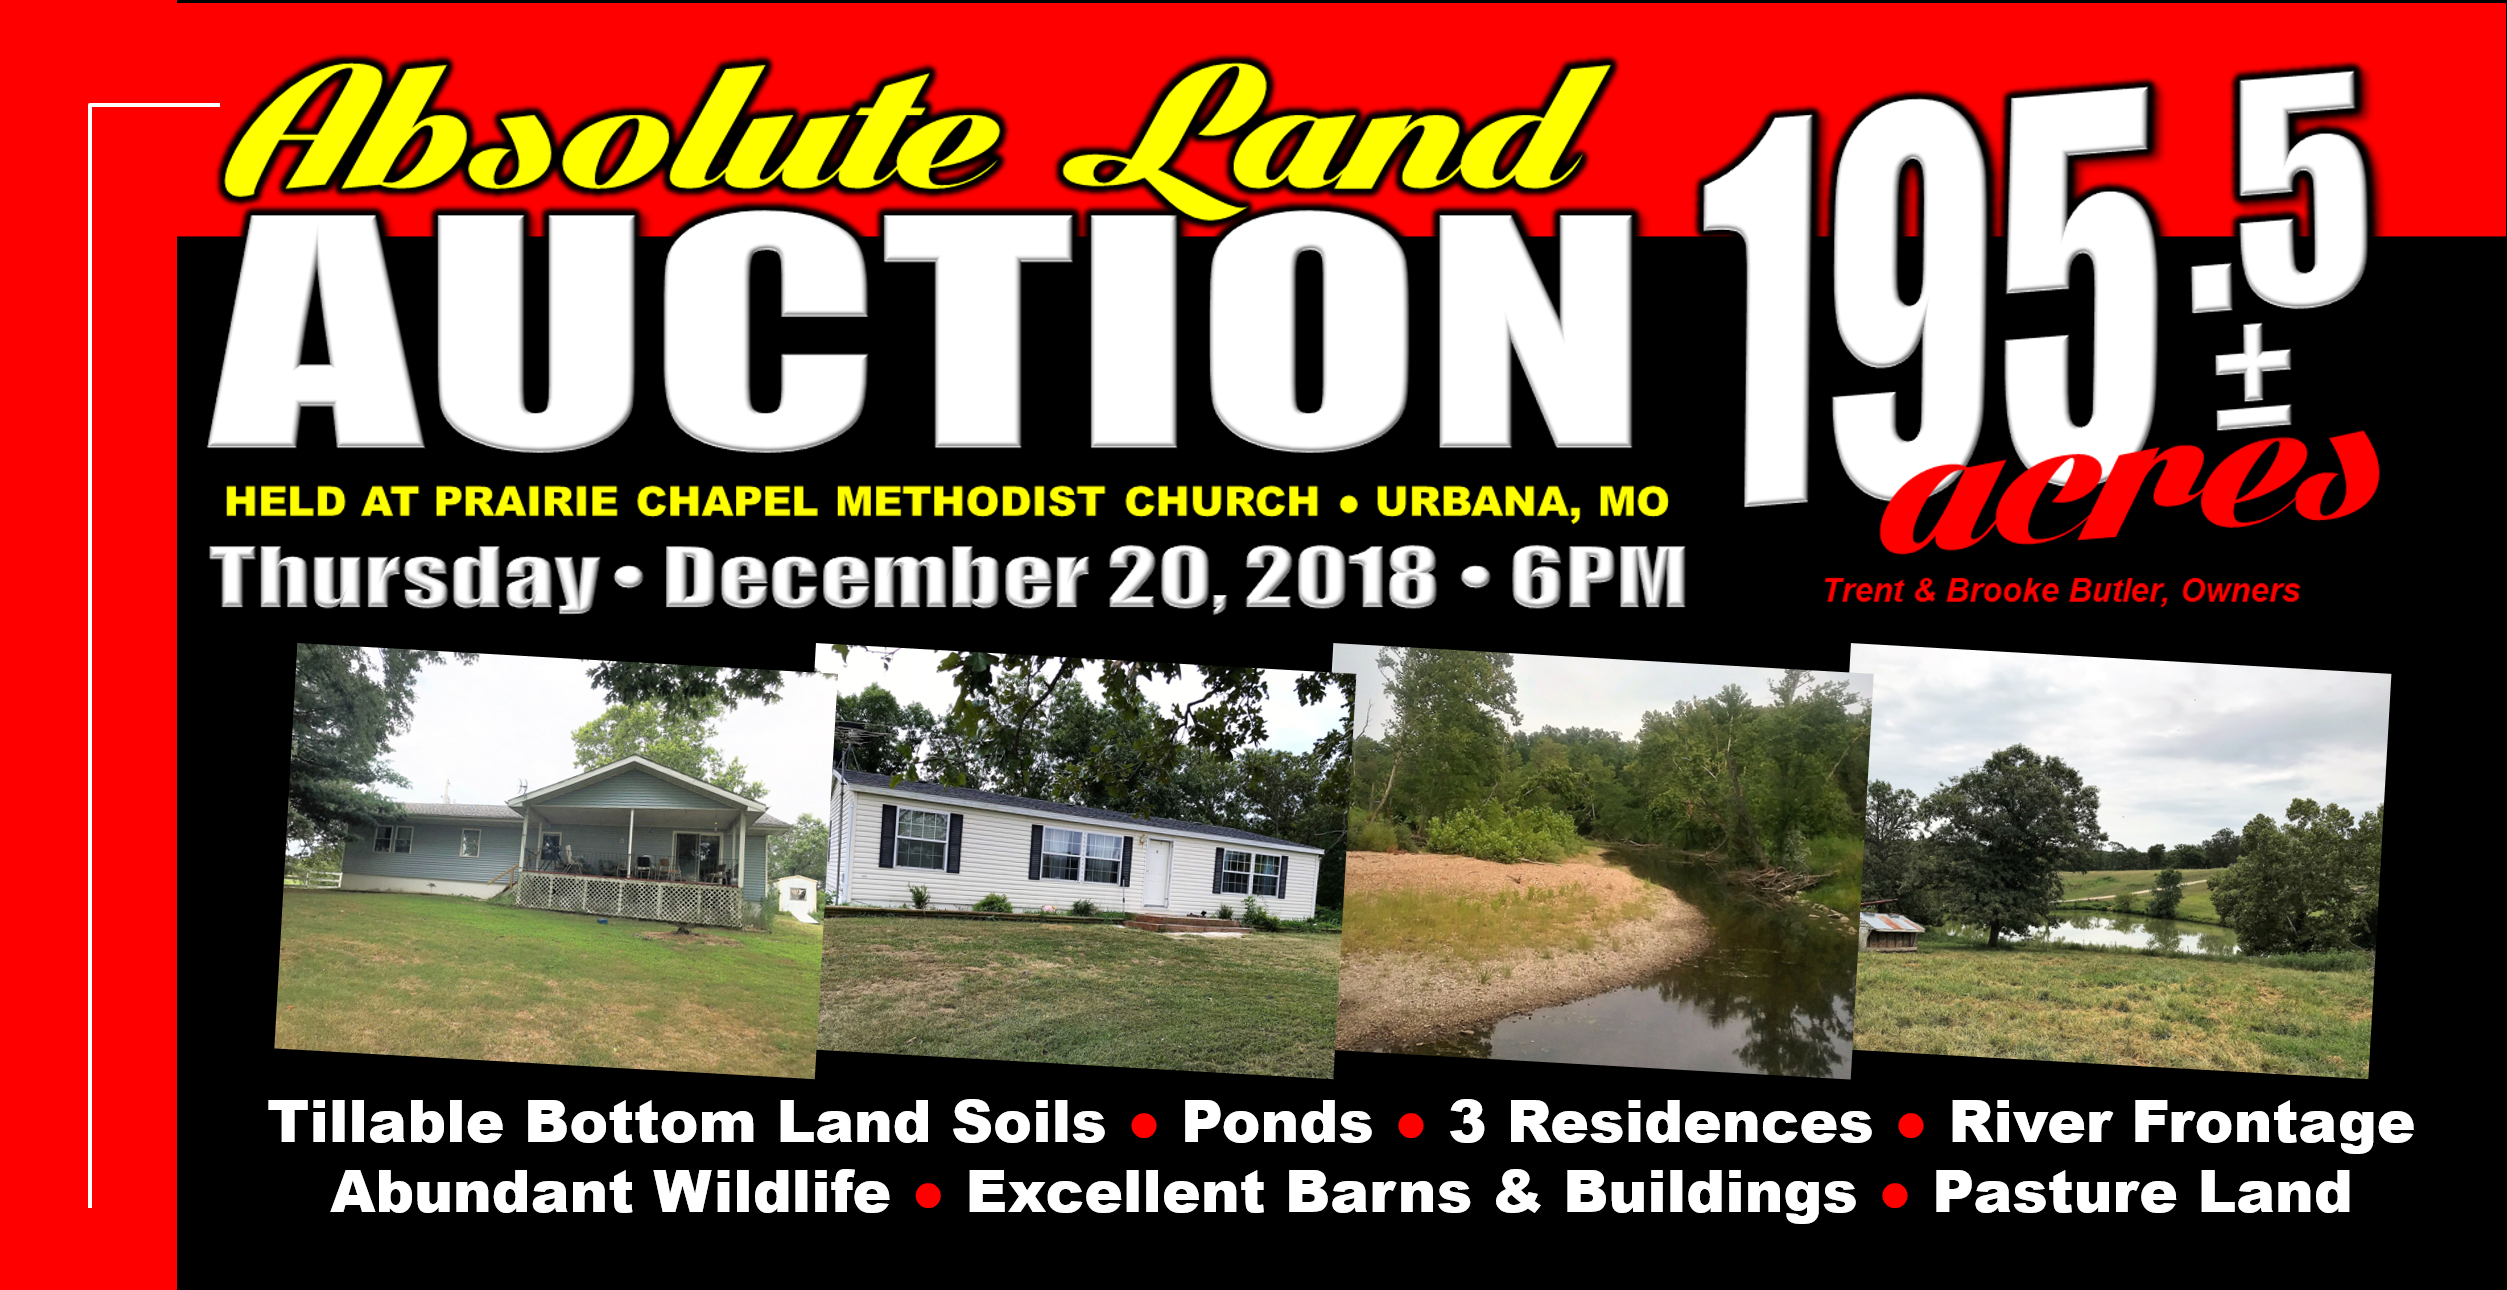 Absolute Land Auction